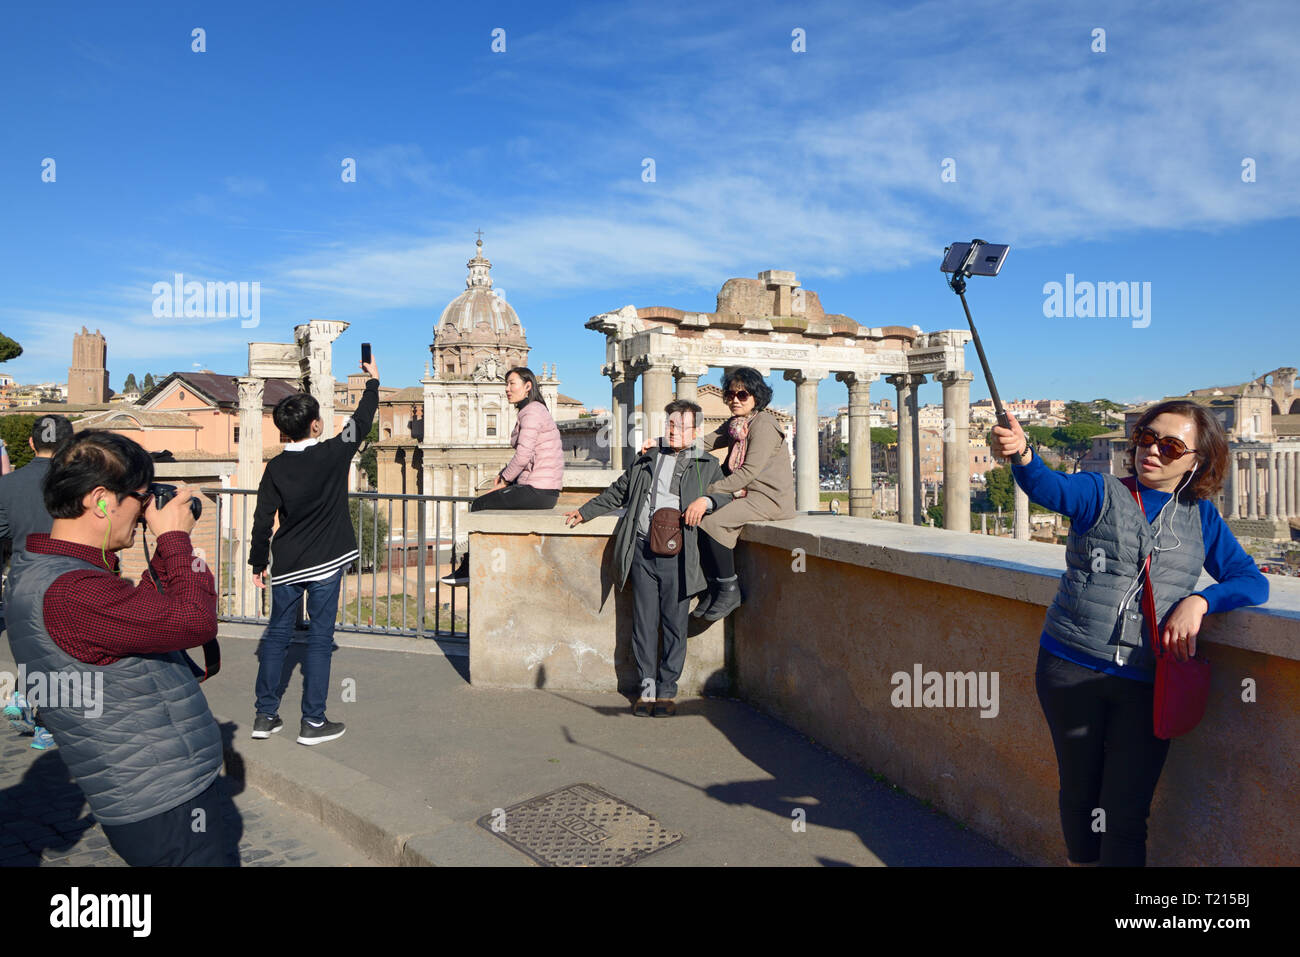 Chinese Tourists Taking Photographs & Selfies in front of the Temple of Saturn (497BC) Roman Forum Rome Italy Stock Photo